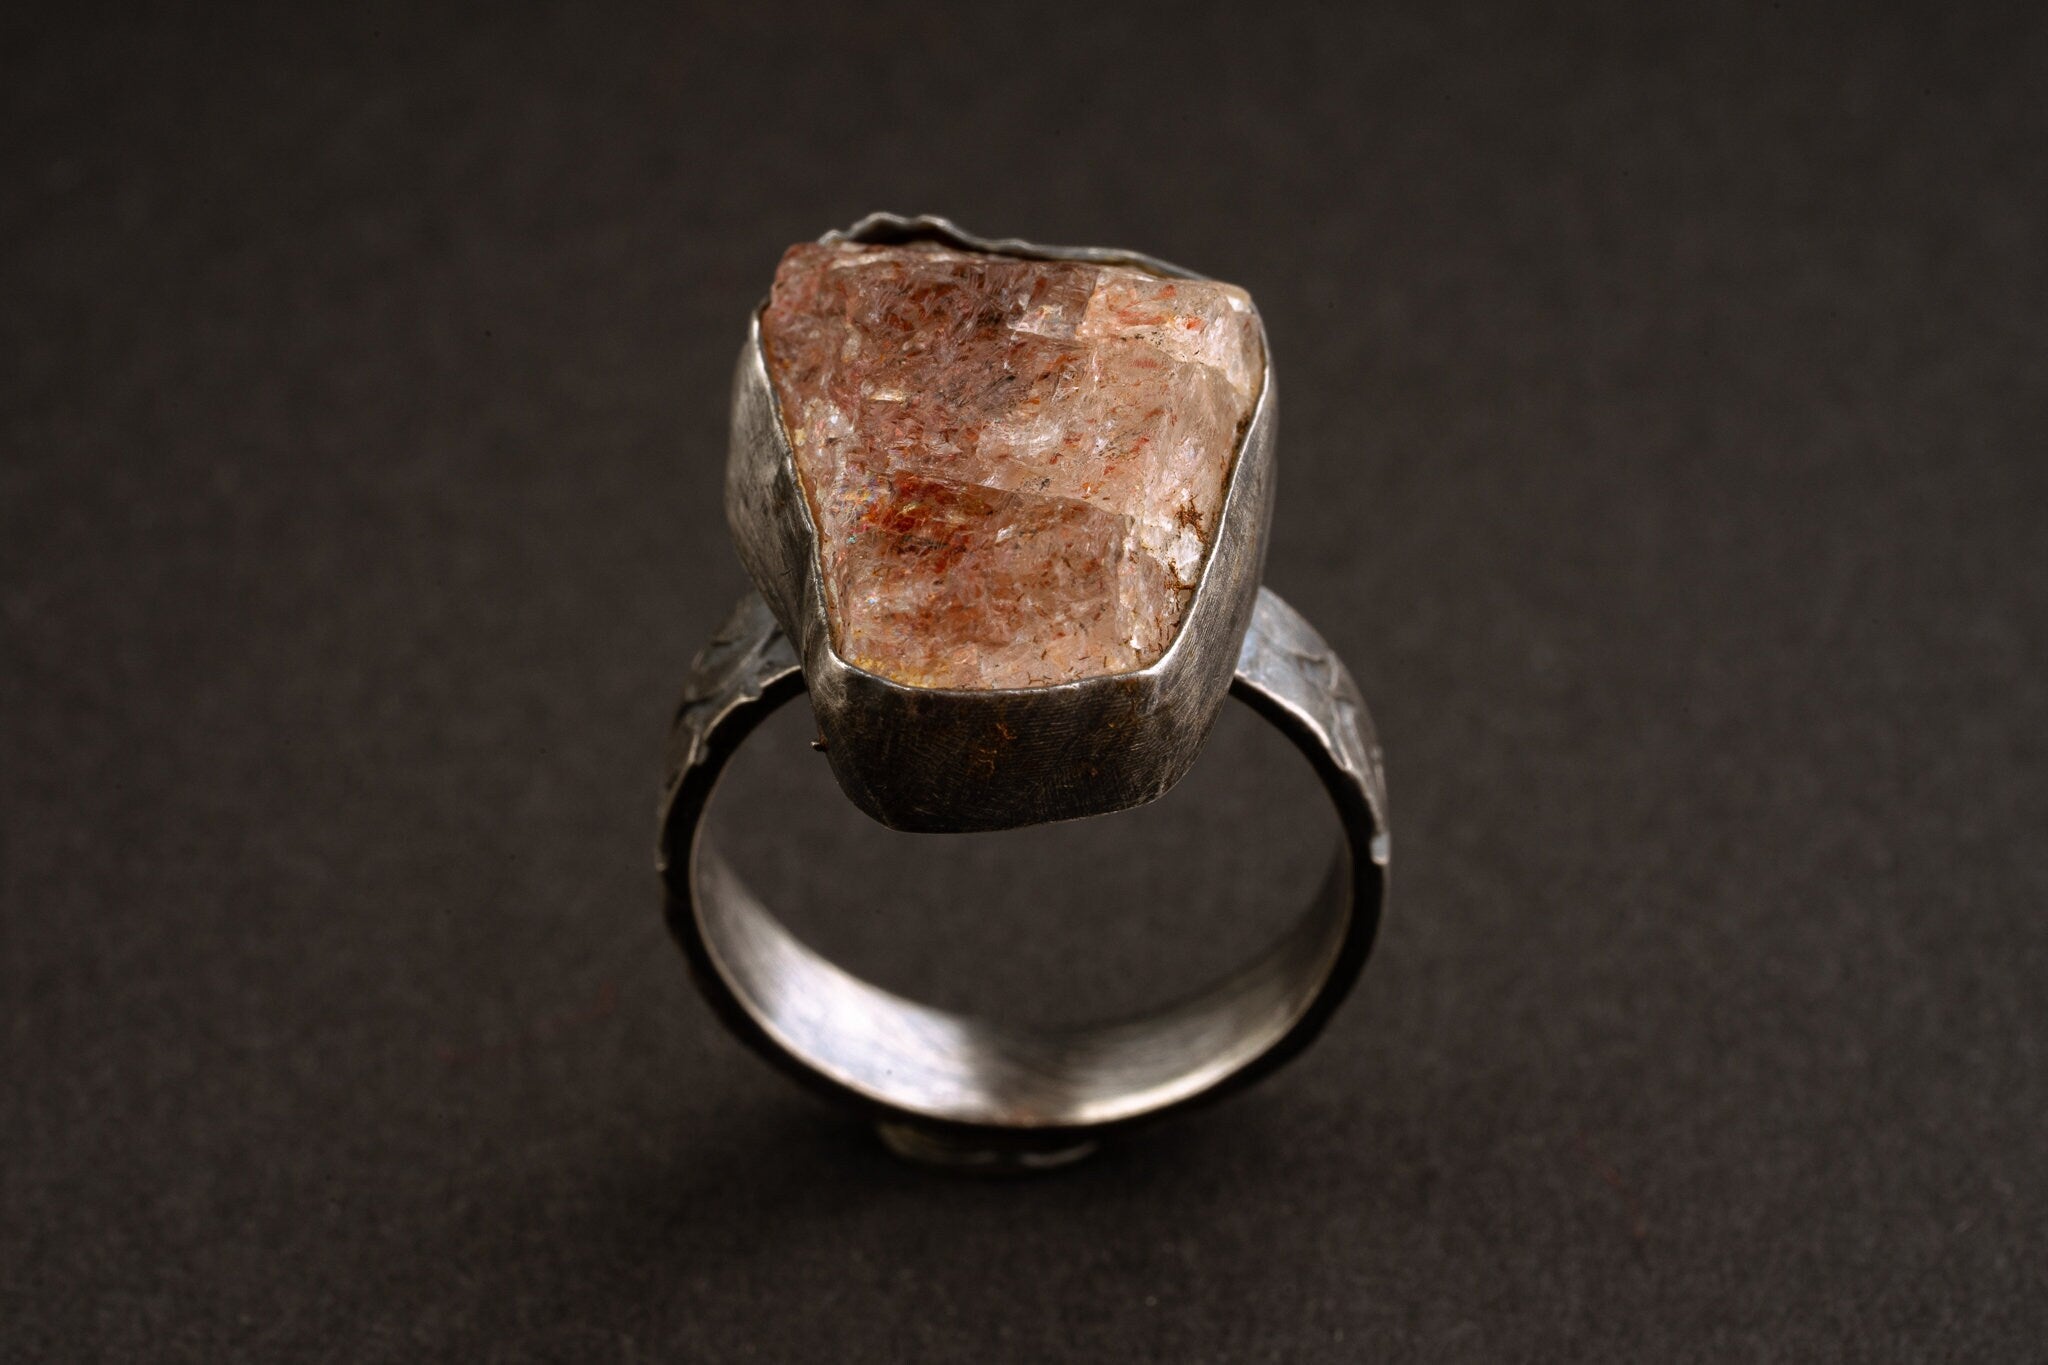 Raw Sunstone Ring - 925 Sterling Silver - Chucky & Solid oxidised and textured -Size 5 US